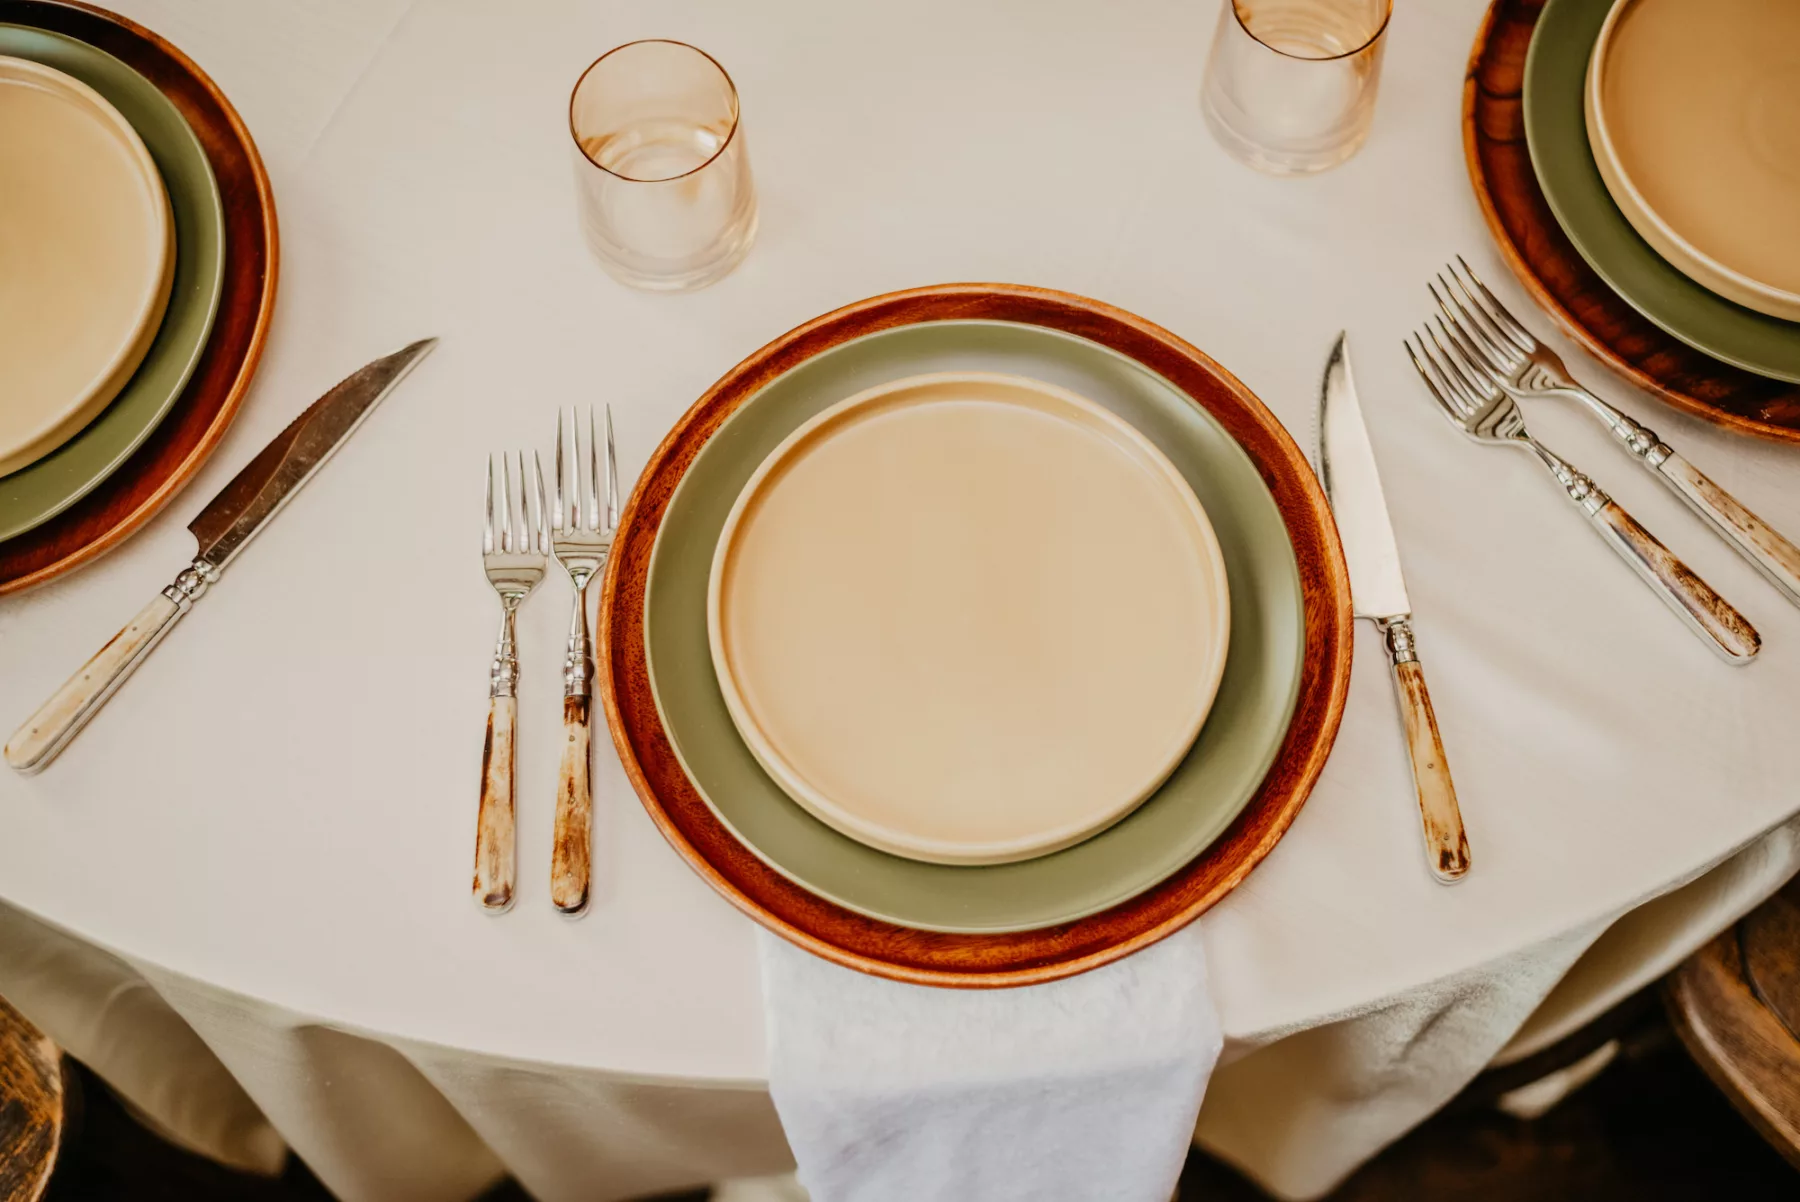 Boho Neutral Wedding Reception Tablesetting with Terracotta Charger, Green Dinner Plate, and Beige Salad Plate with Vintage Gold Flatware Ideas